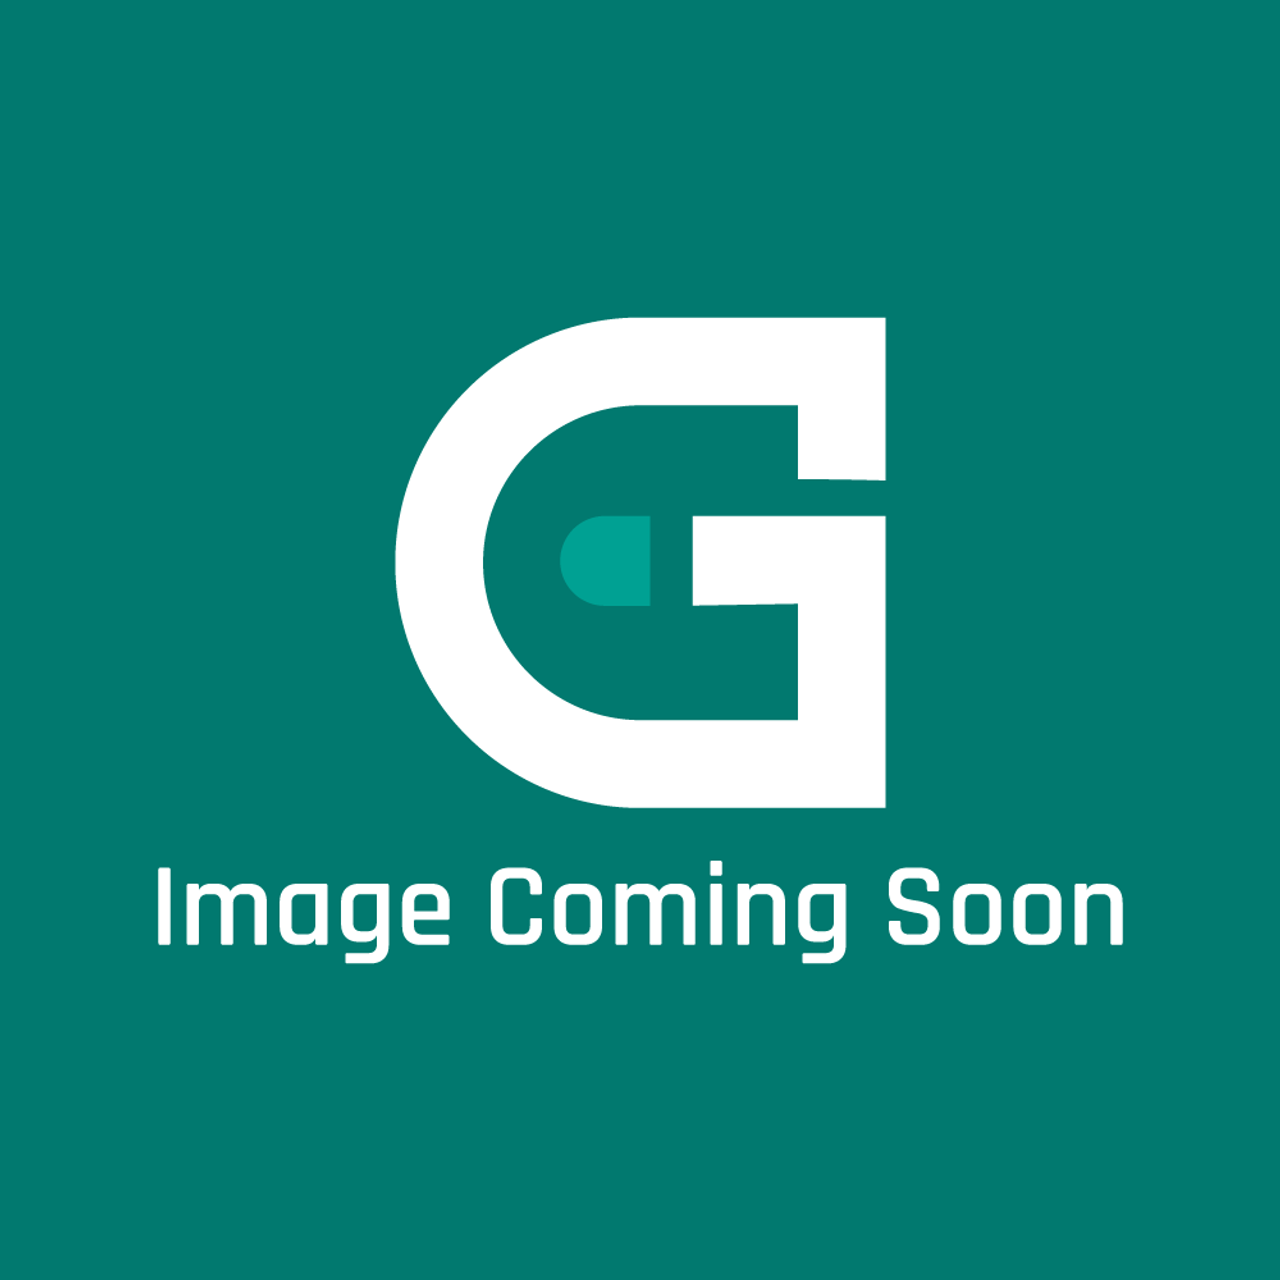 Vulcan Hart VH00-927616-0000A - Griddle Plate - Image Coming Soon!